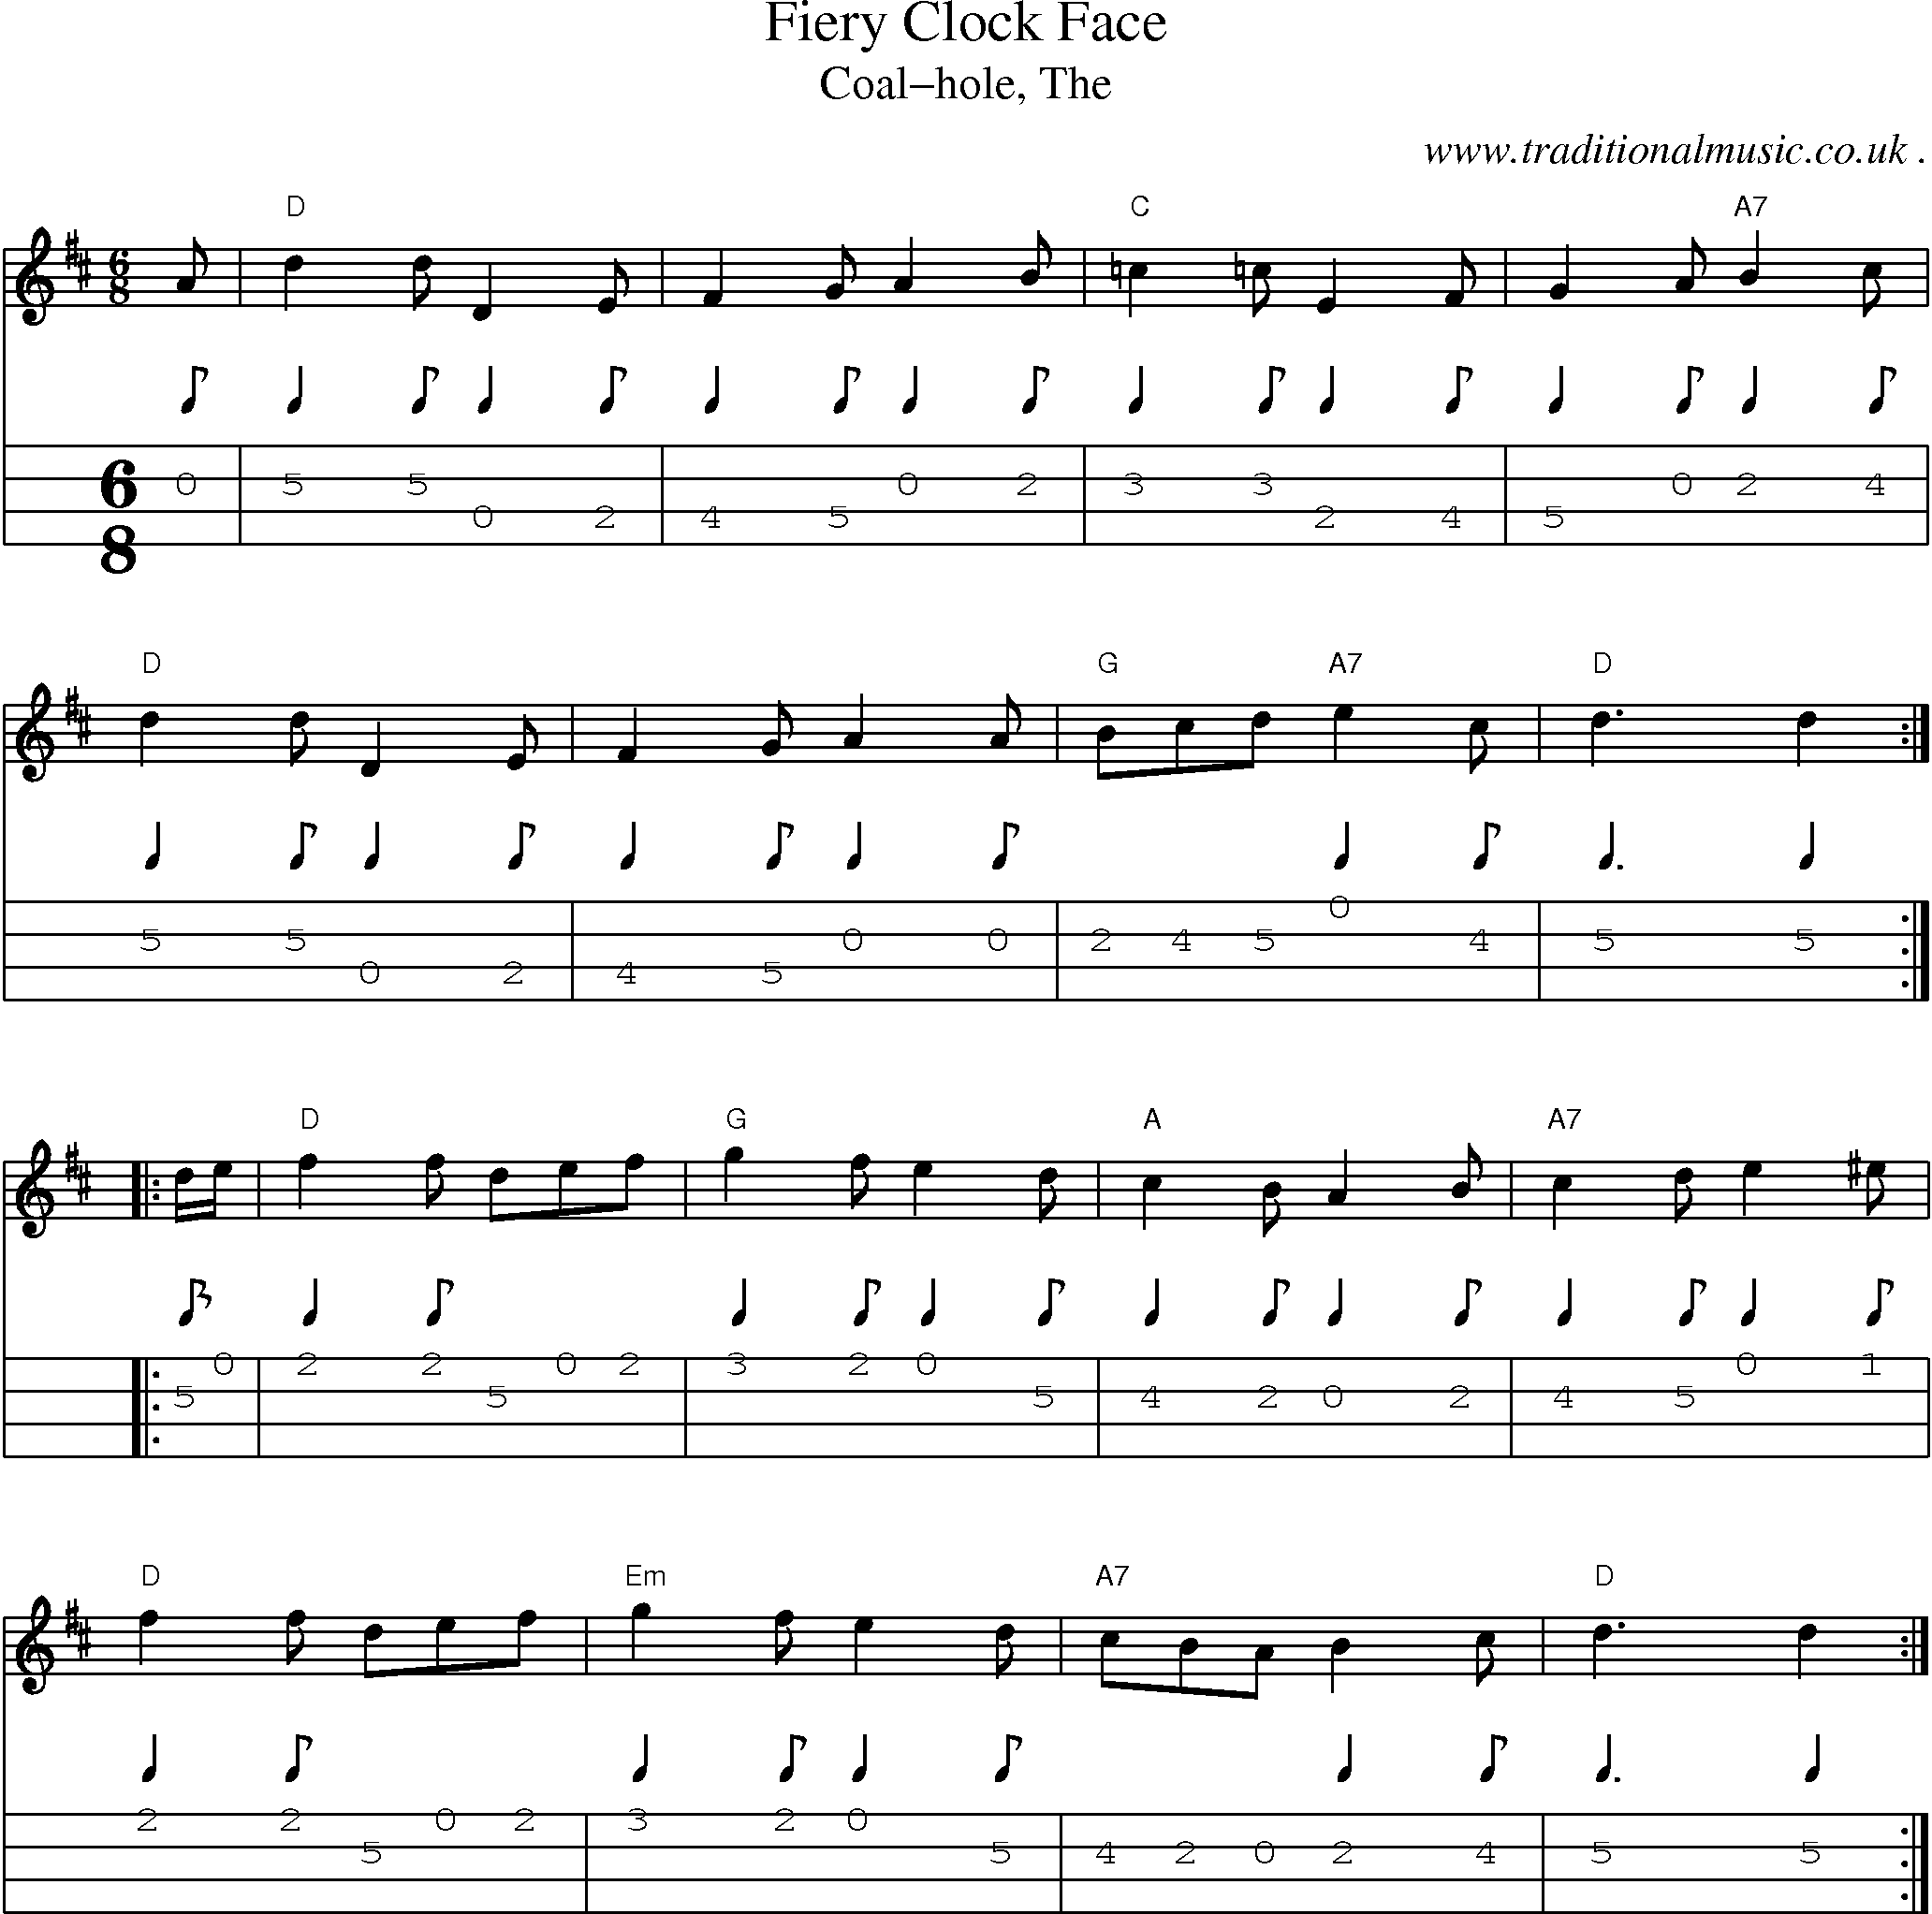 Music Score and Guitar Tabs for Fiery Clock Face